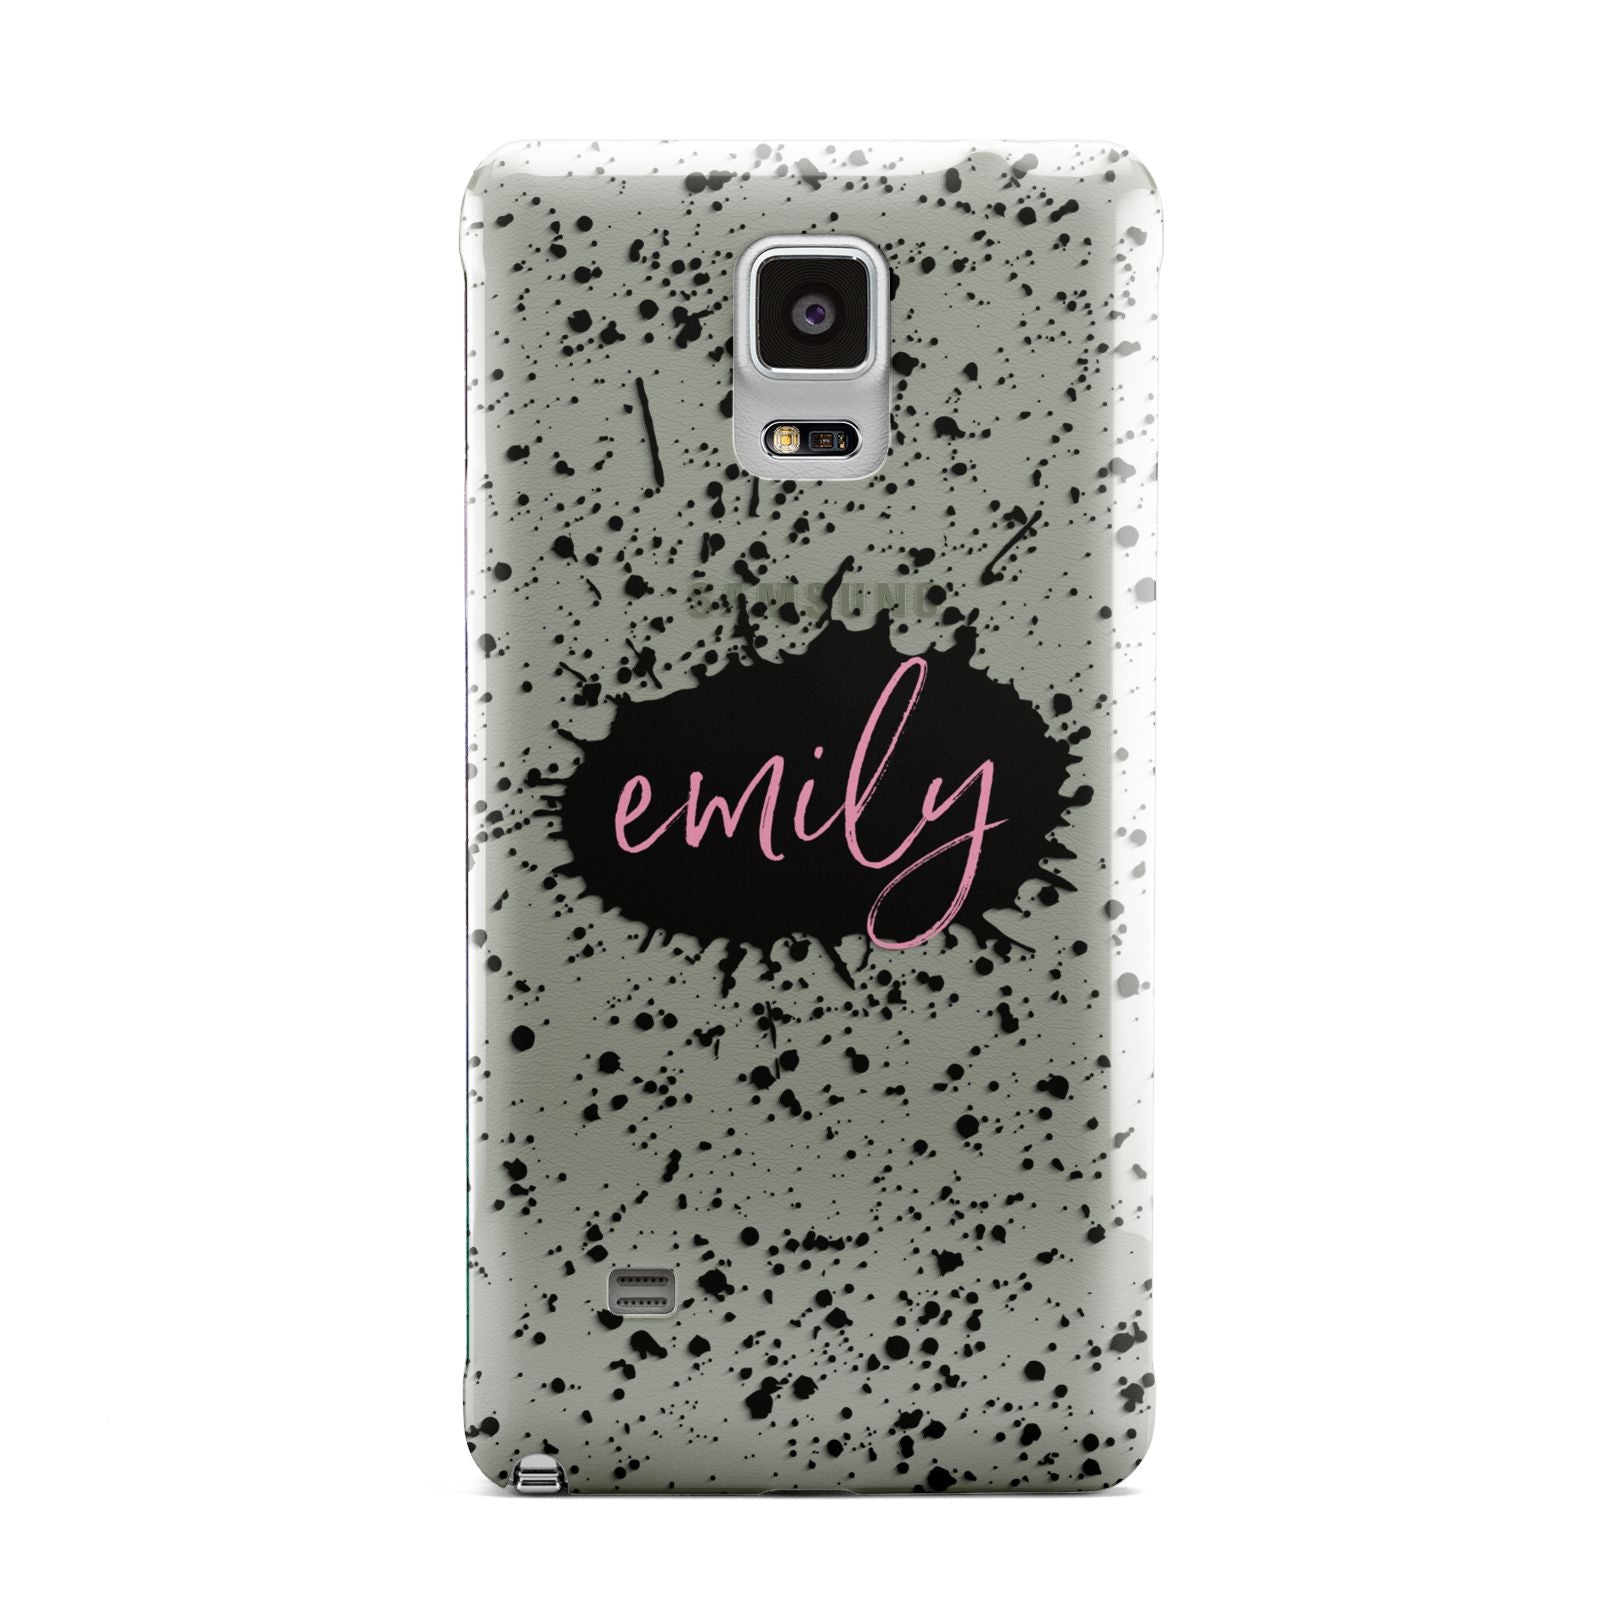 Personalised Black Ink Splat Clear Name Samsung Galaxy Note 4 Case